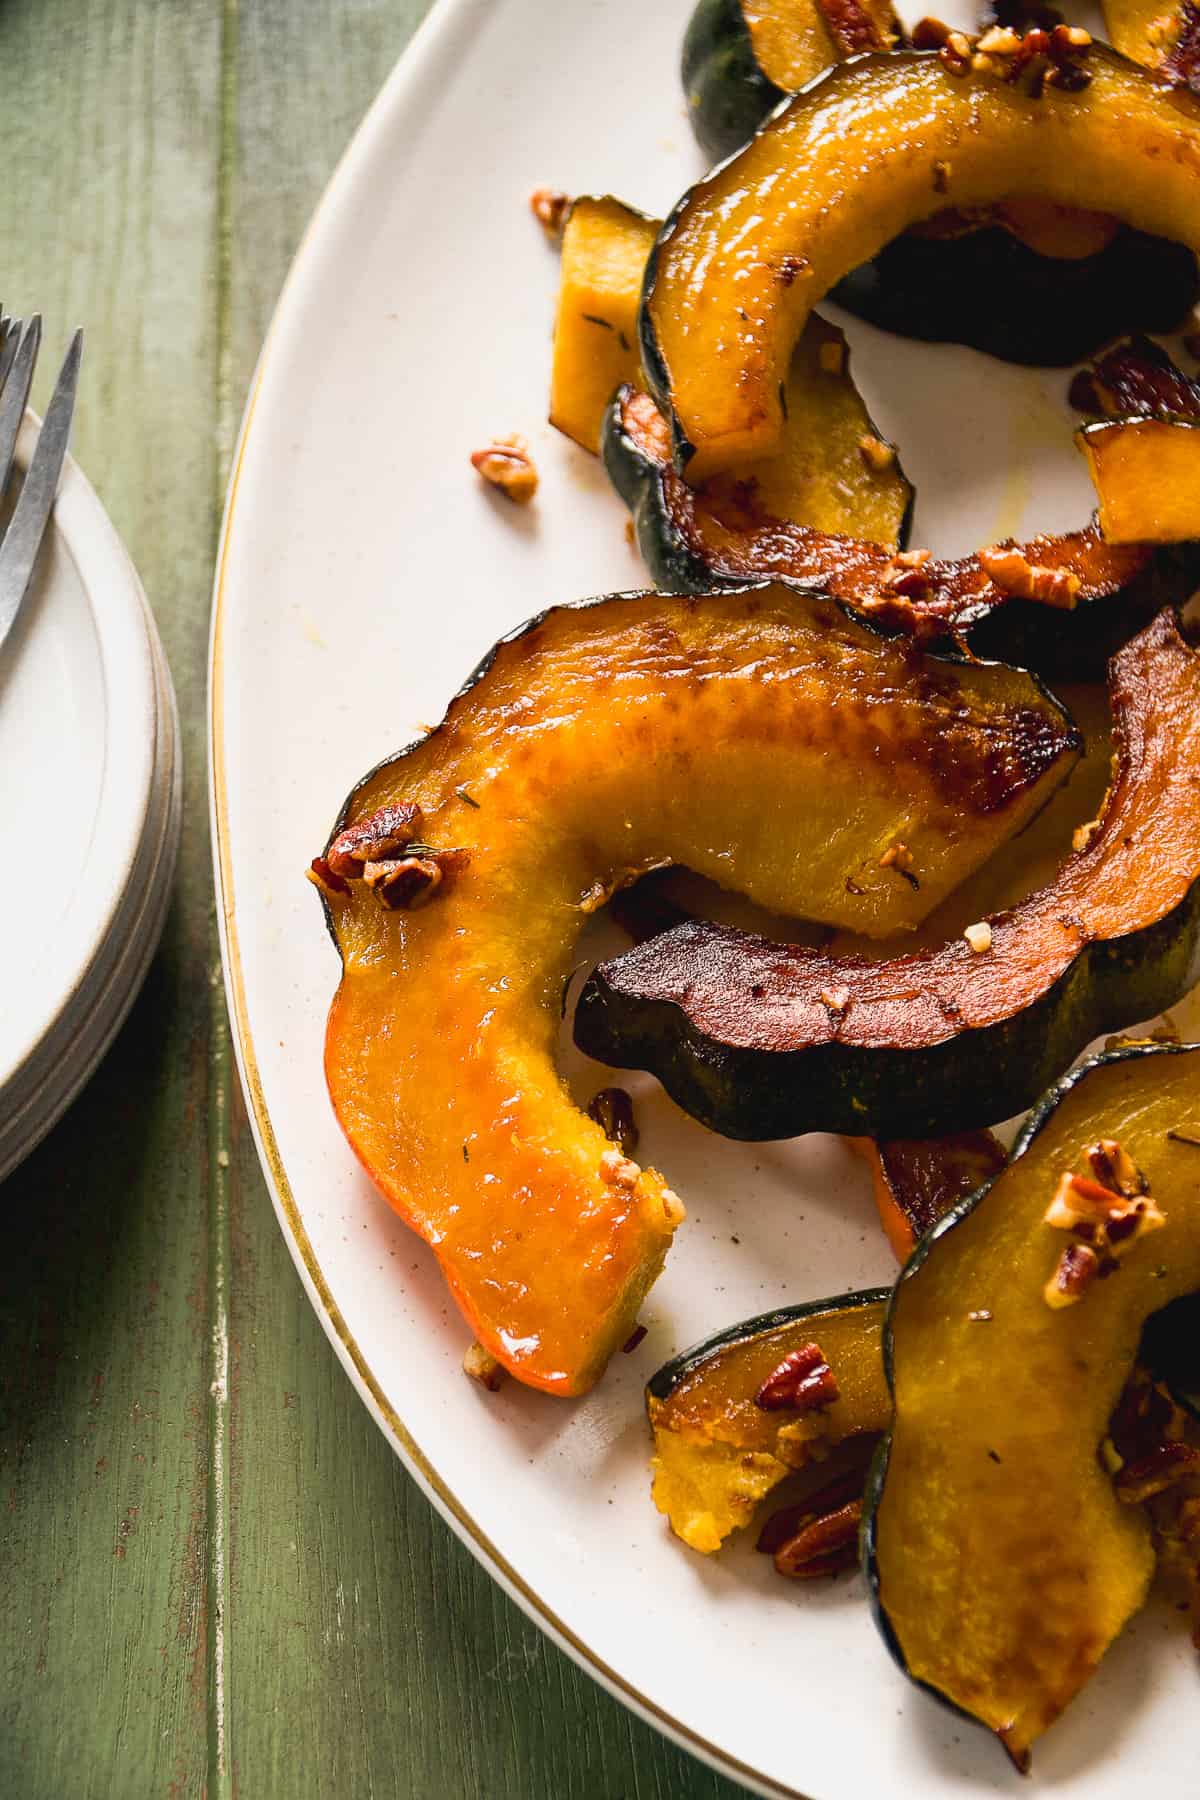 Acorn squash slices tossed in a maple pecan dressing roasted in the oven on a platter.